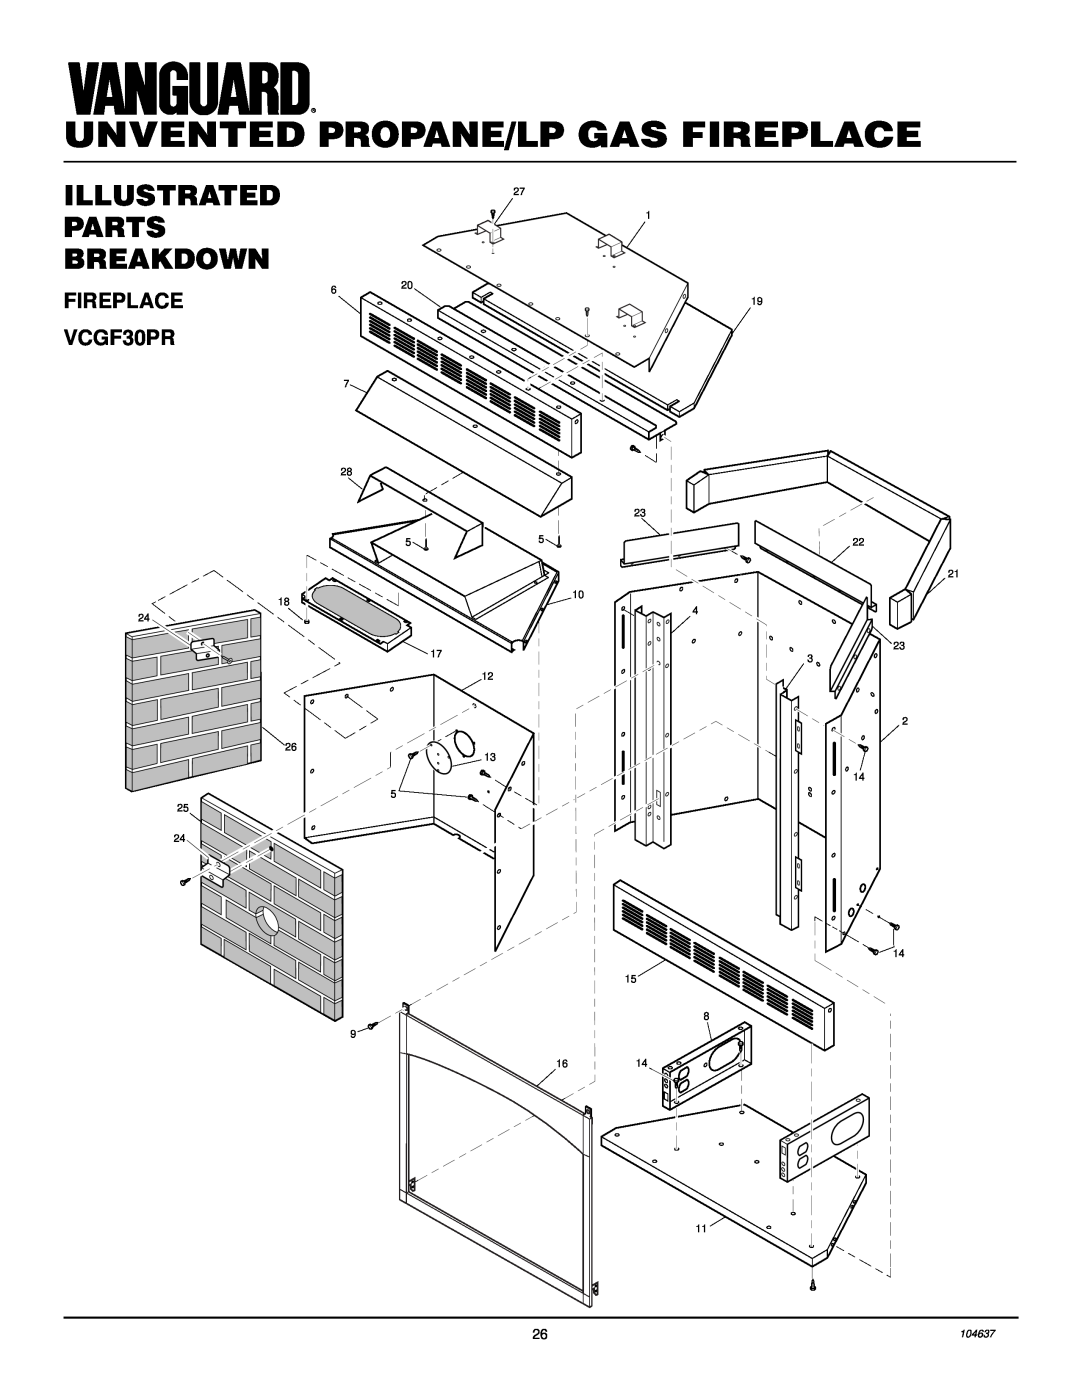 Desa FIREPLACE VCGF30PR, Unvented Propane/Lp Gas Fireplace, Illustrated Parts Breakdown, 27 1 620 7 28 23 5 10, 1614 